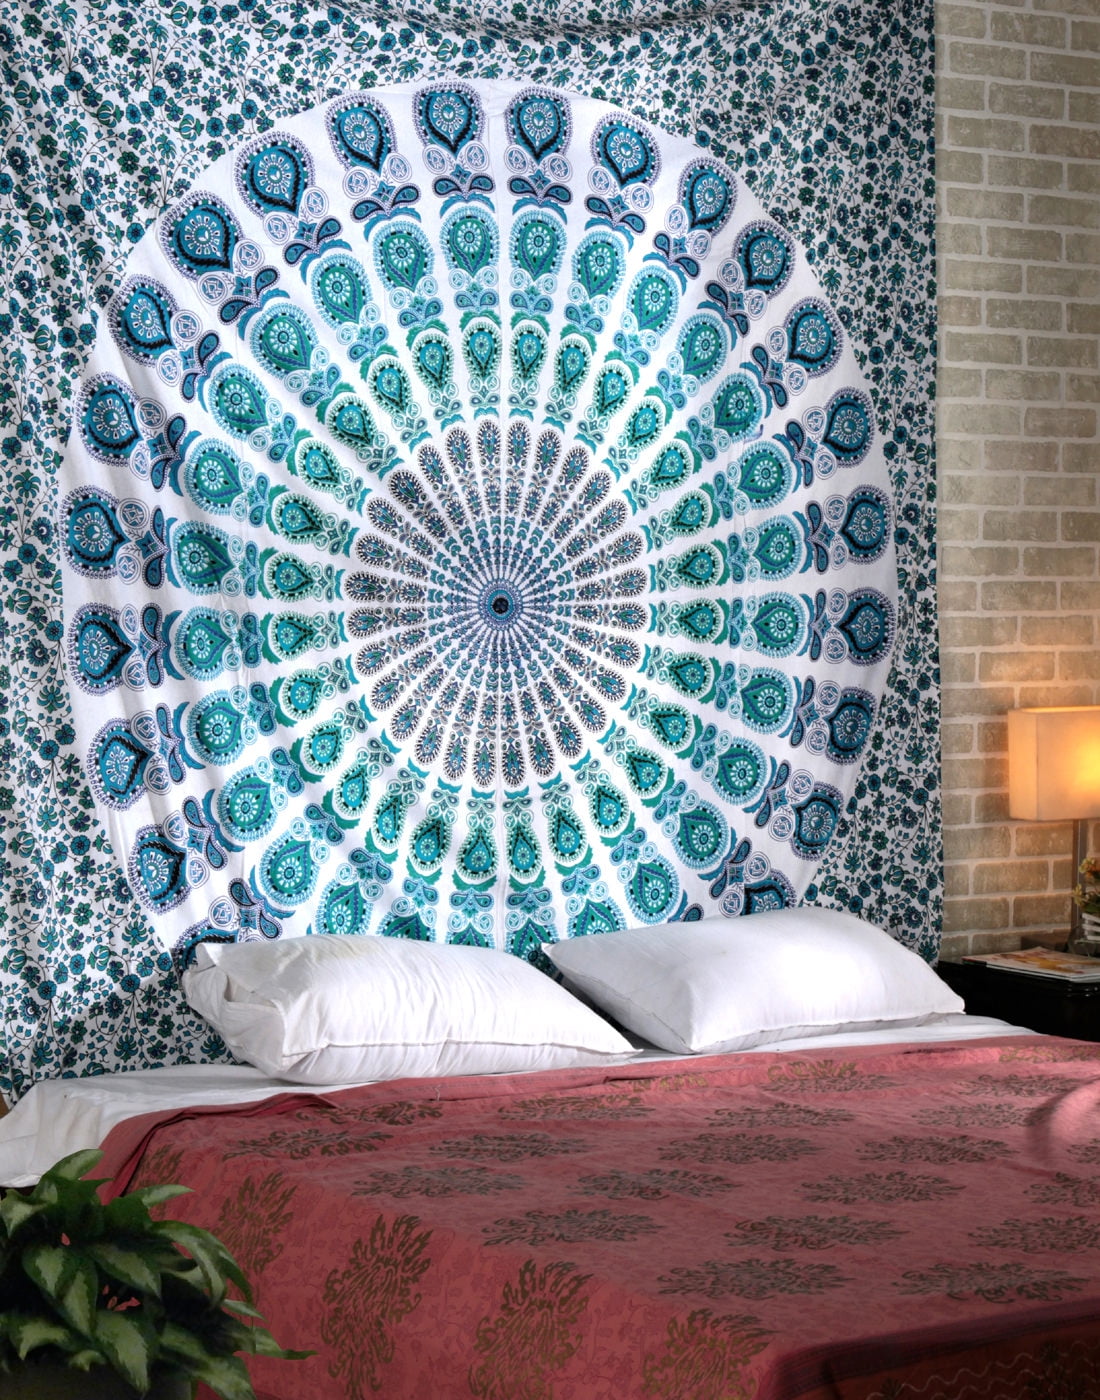 Details about   Peacock Mandala Tapestry Wall Hanging Throw Hippie Bohemian India Cotton Cover 